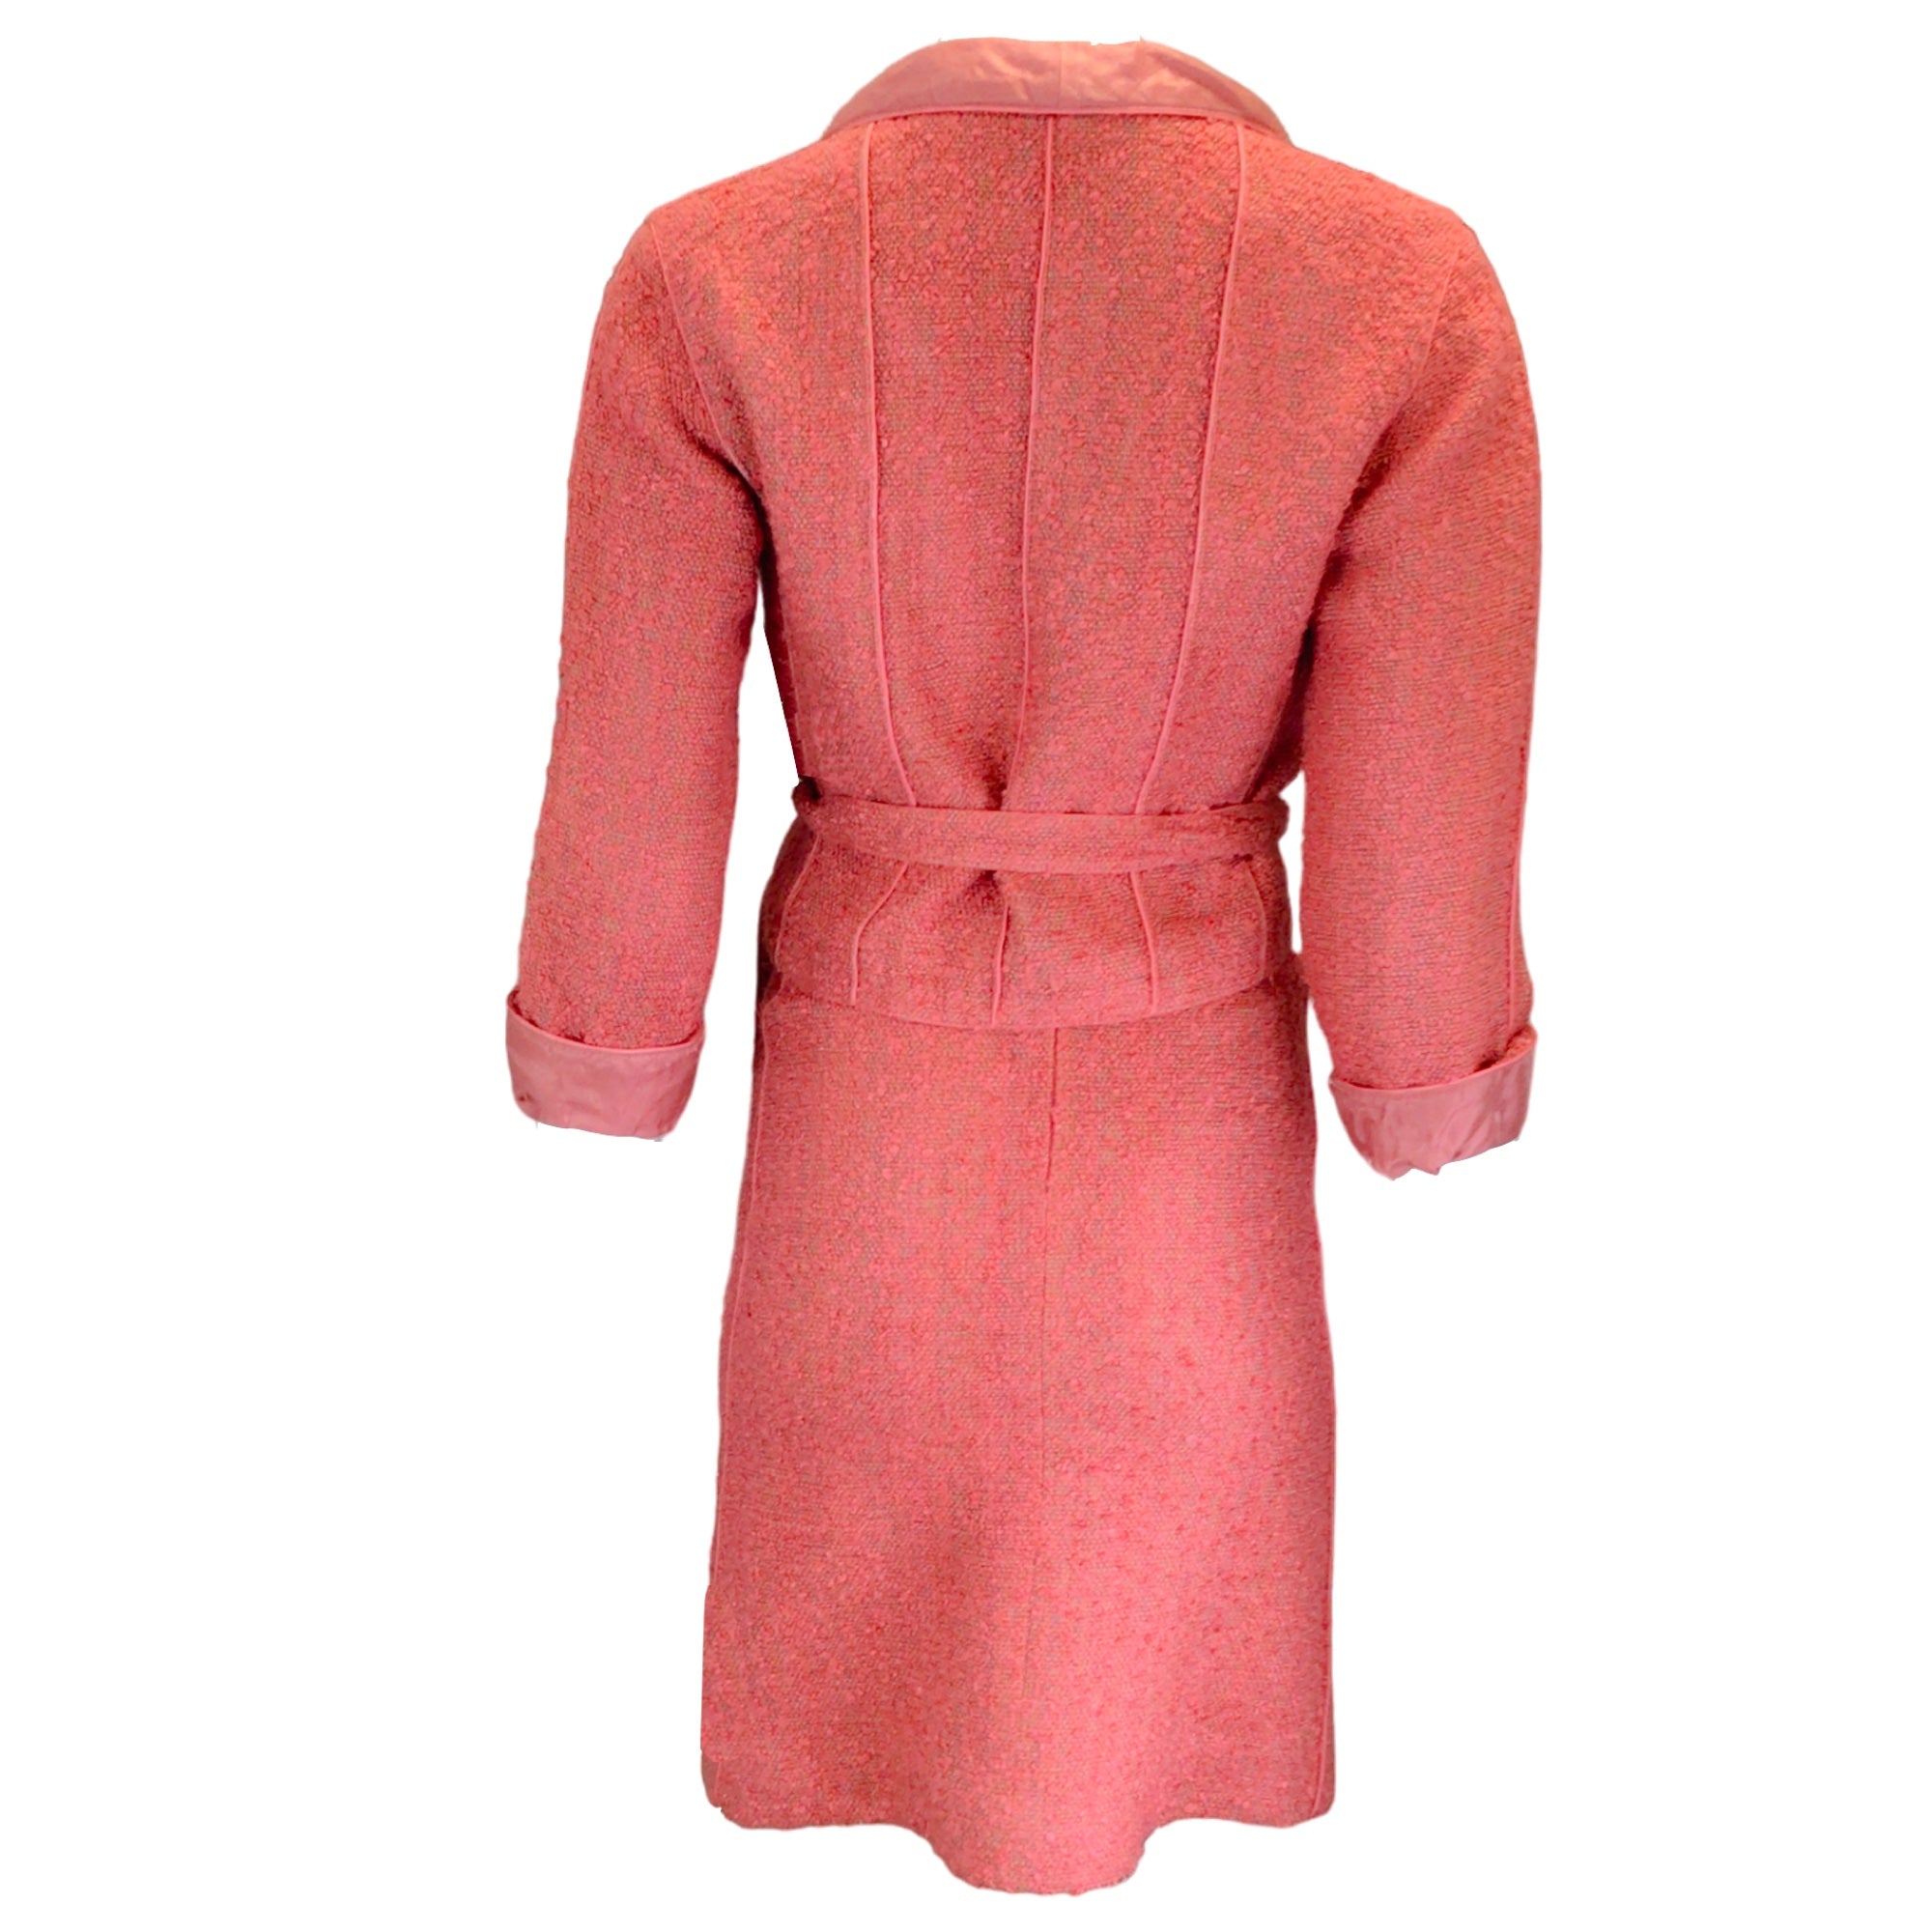 Chanel Pink Vintage 1999 Tweed Jacket and Skirt Two-Piece Skirt Suit Set